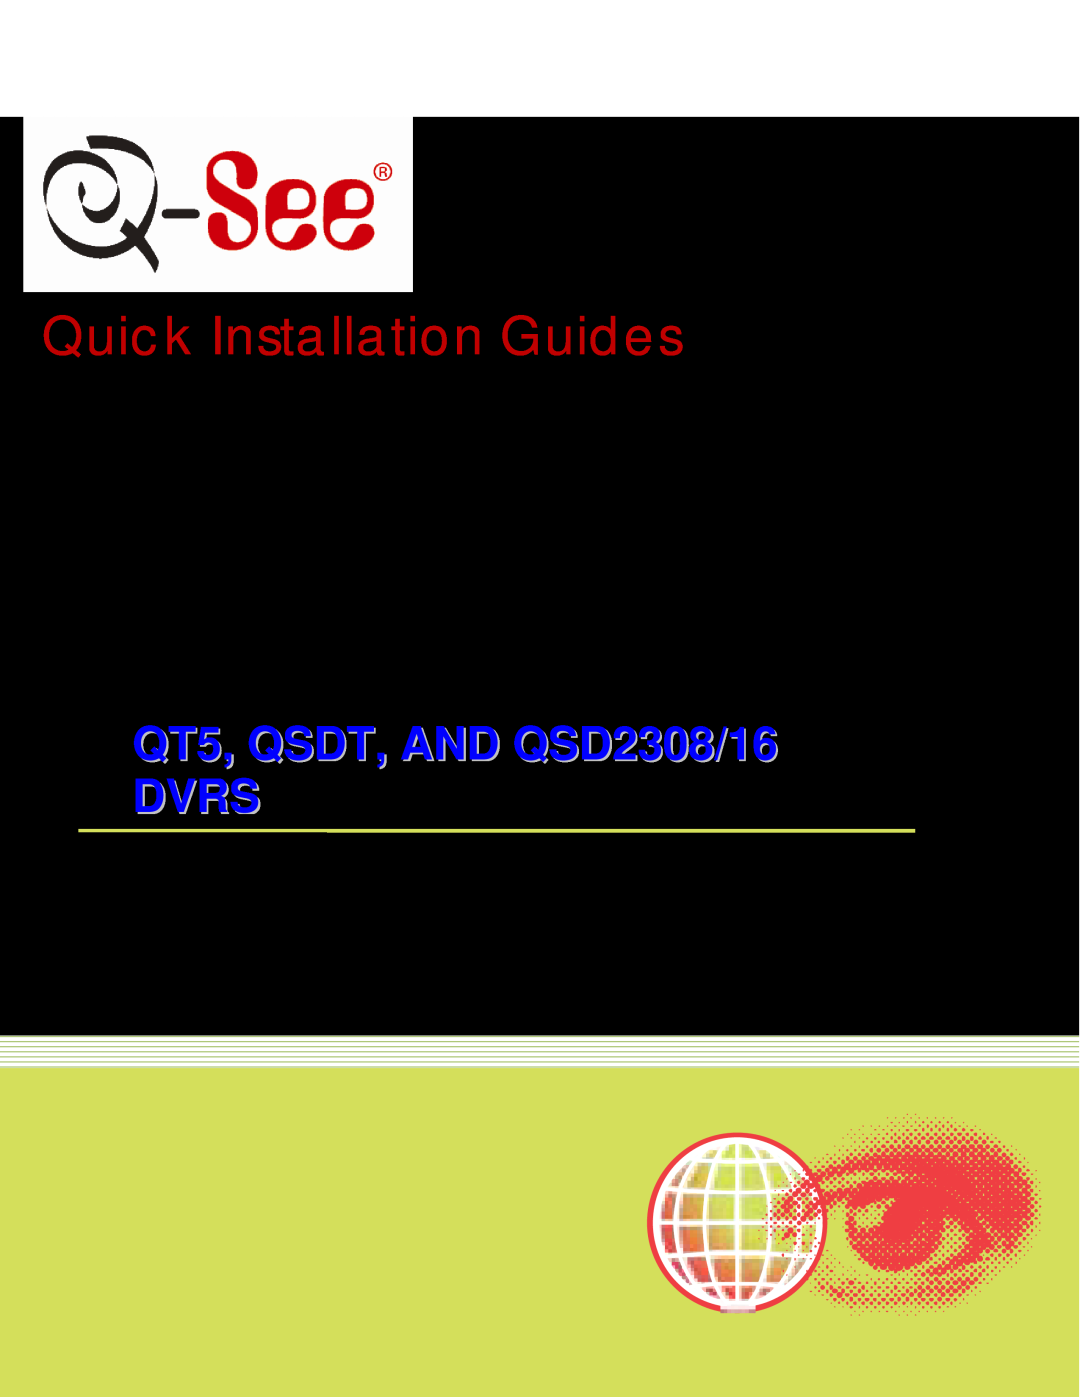 Q-See AND QSD2308/16 DVRS, QT5 setup guide Quick Installation Guides, Remote Monitoring Guide MYQ-SEE DDNS Setup Guide 